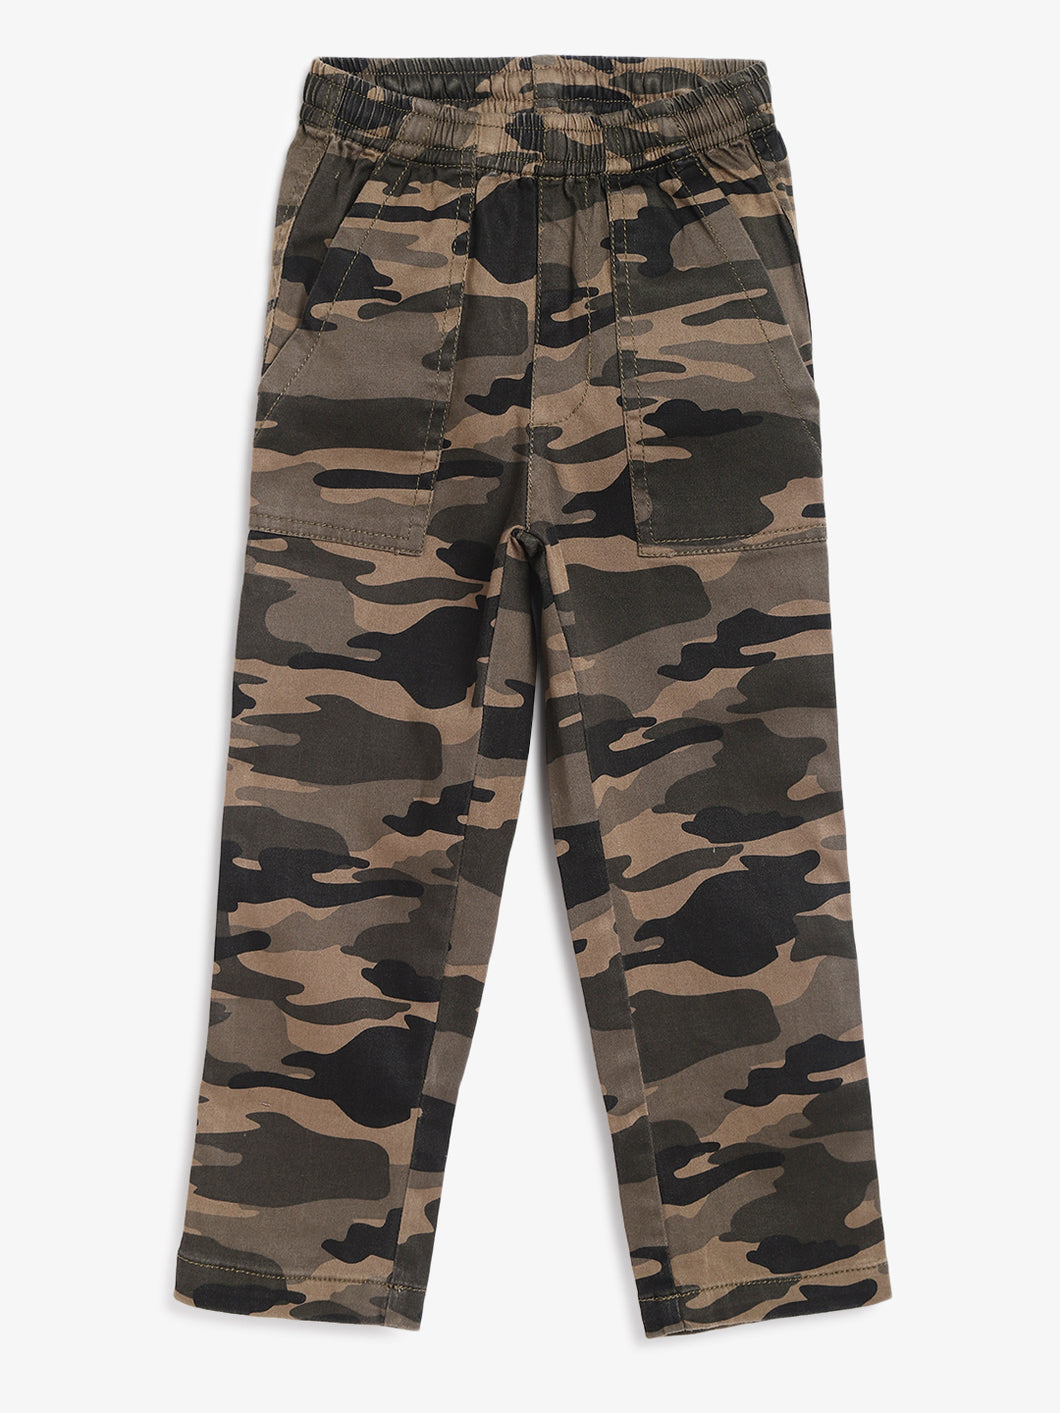 Campana Boys Otto Pull-on Cotton Pants - Camouflage Print - Olive